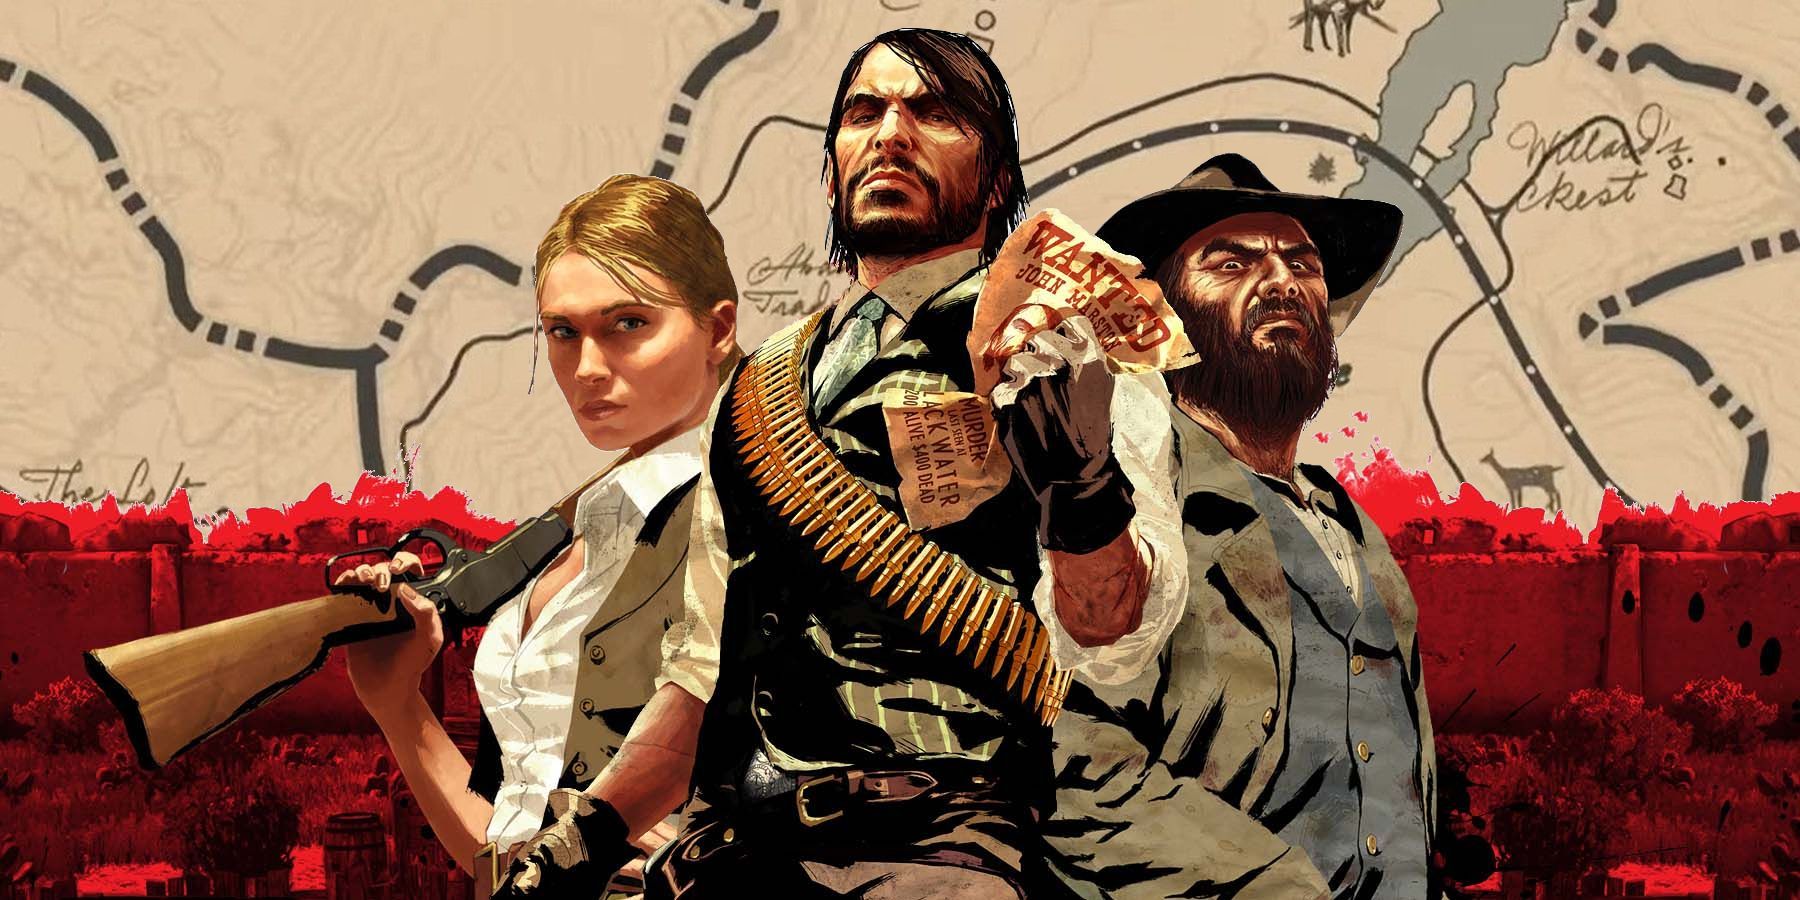 Red Dead Redemption BR